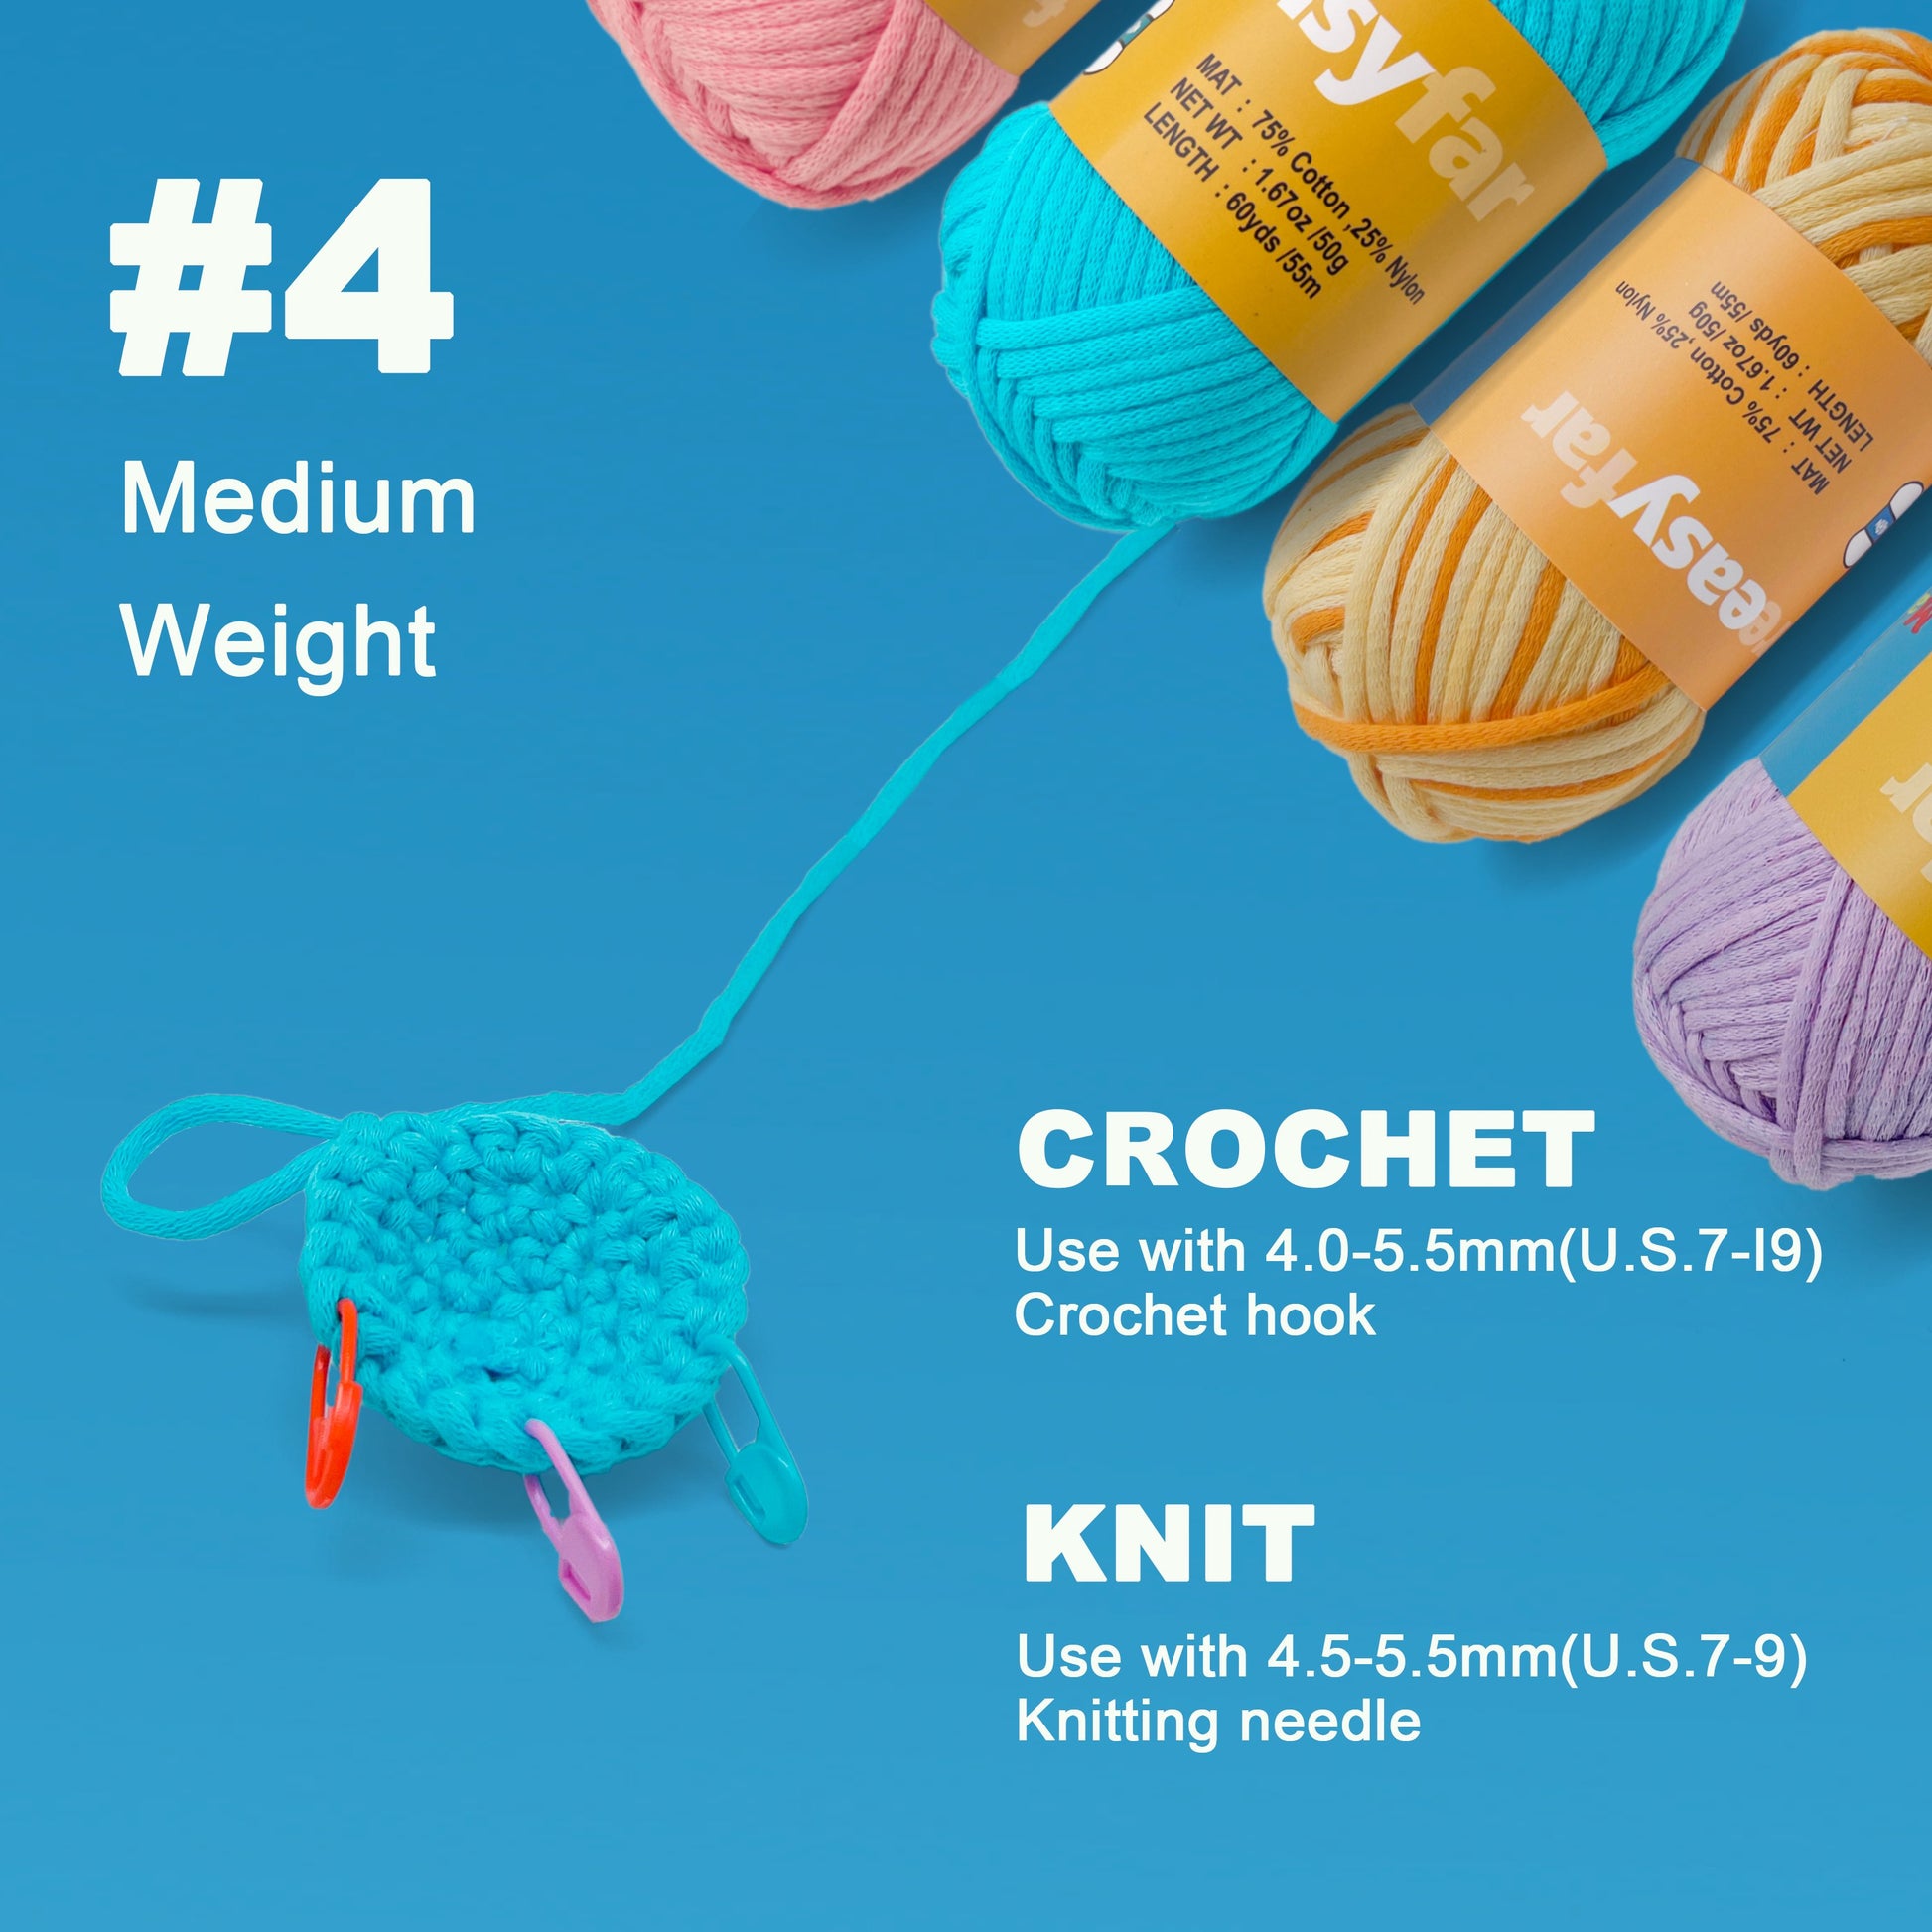  60g Grey Yarn for Crocheting and Knitting;66m (72yds) Cotton  Yarn for Beginners with Easy-to-See Stitches;Worsted-Weight Medium  #4;Cotton-Nylon Blend Yarn for Beginners Crochet Kit Making